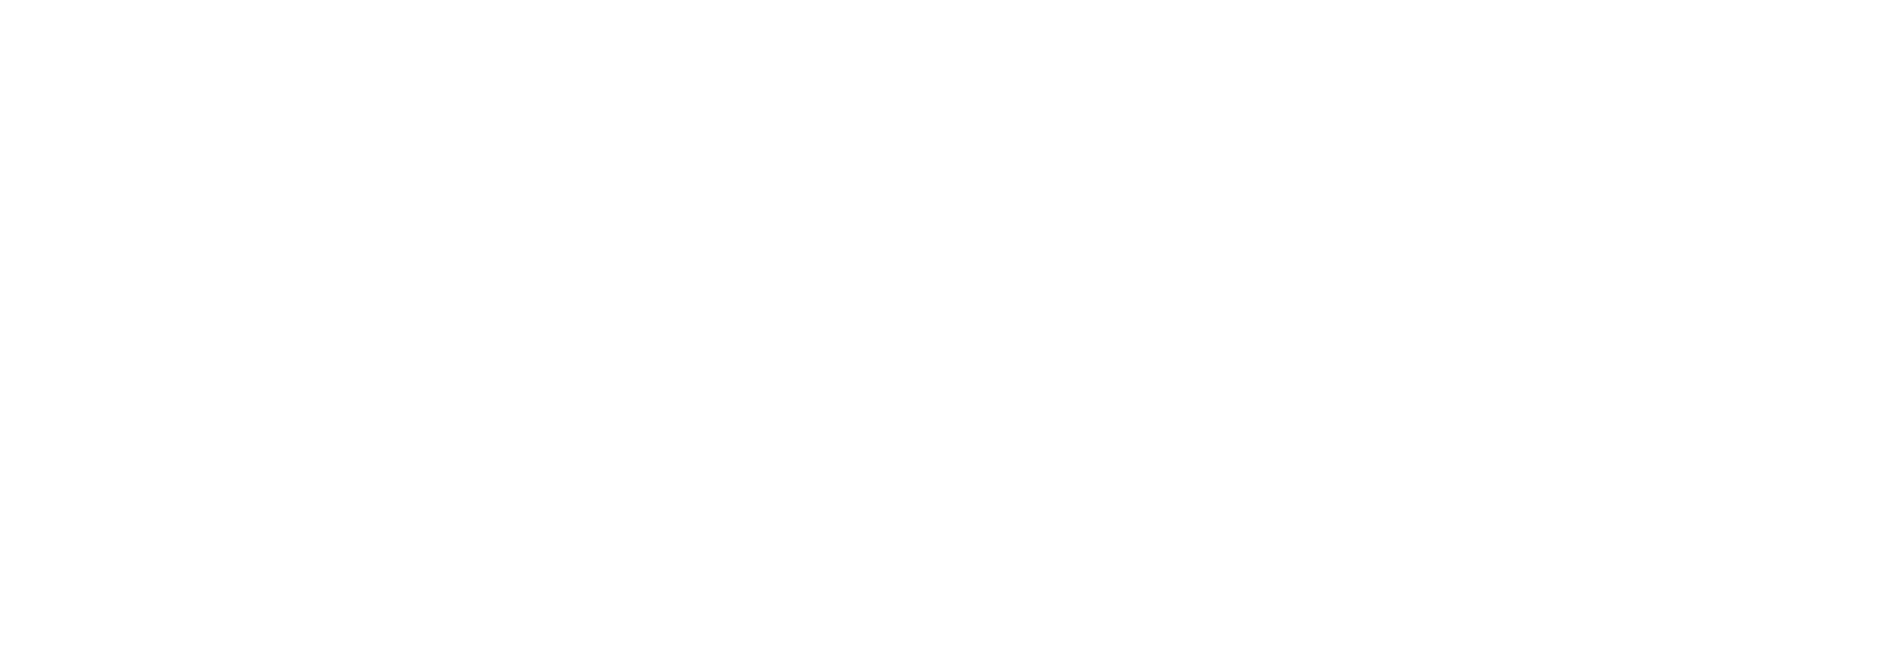 The answer is person to person